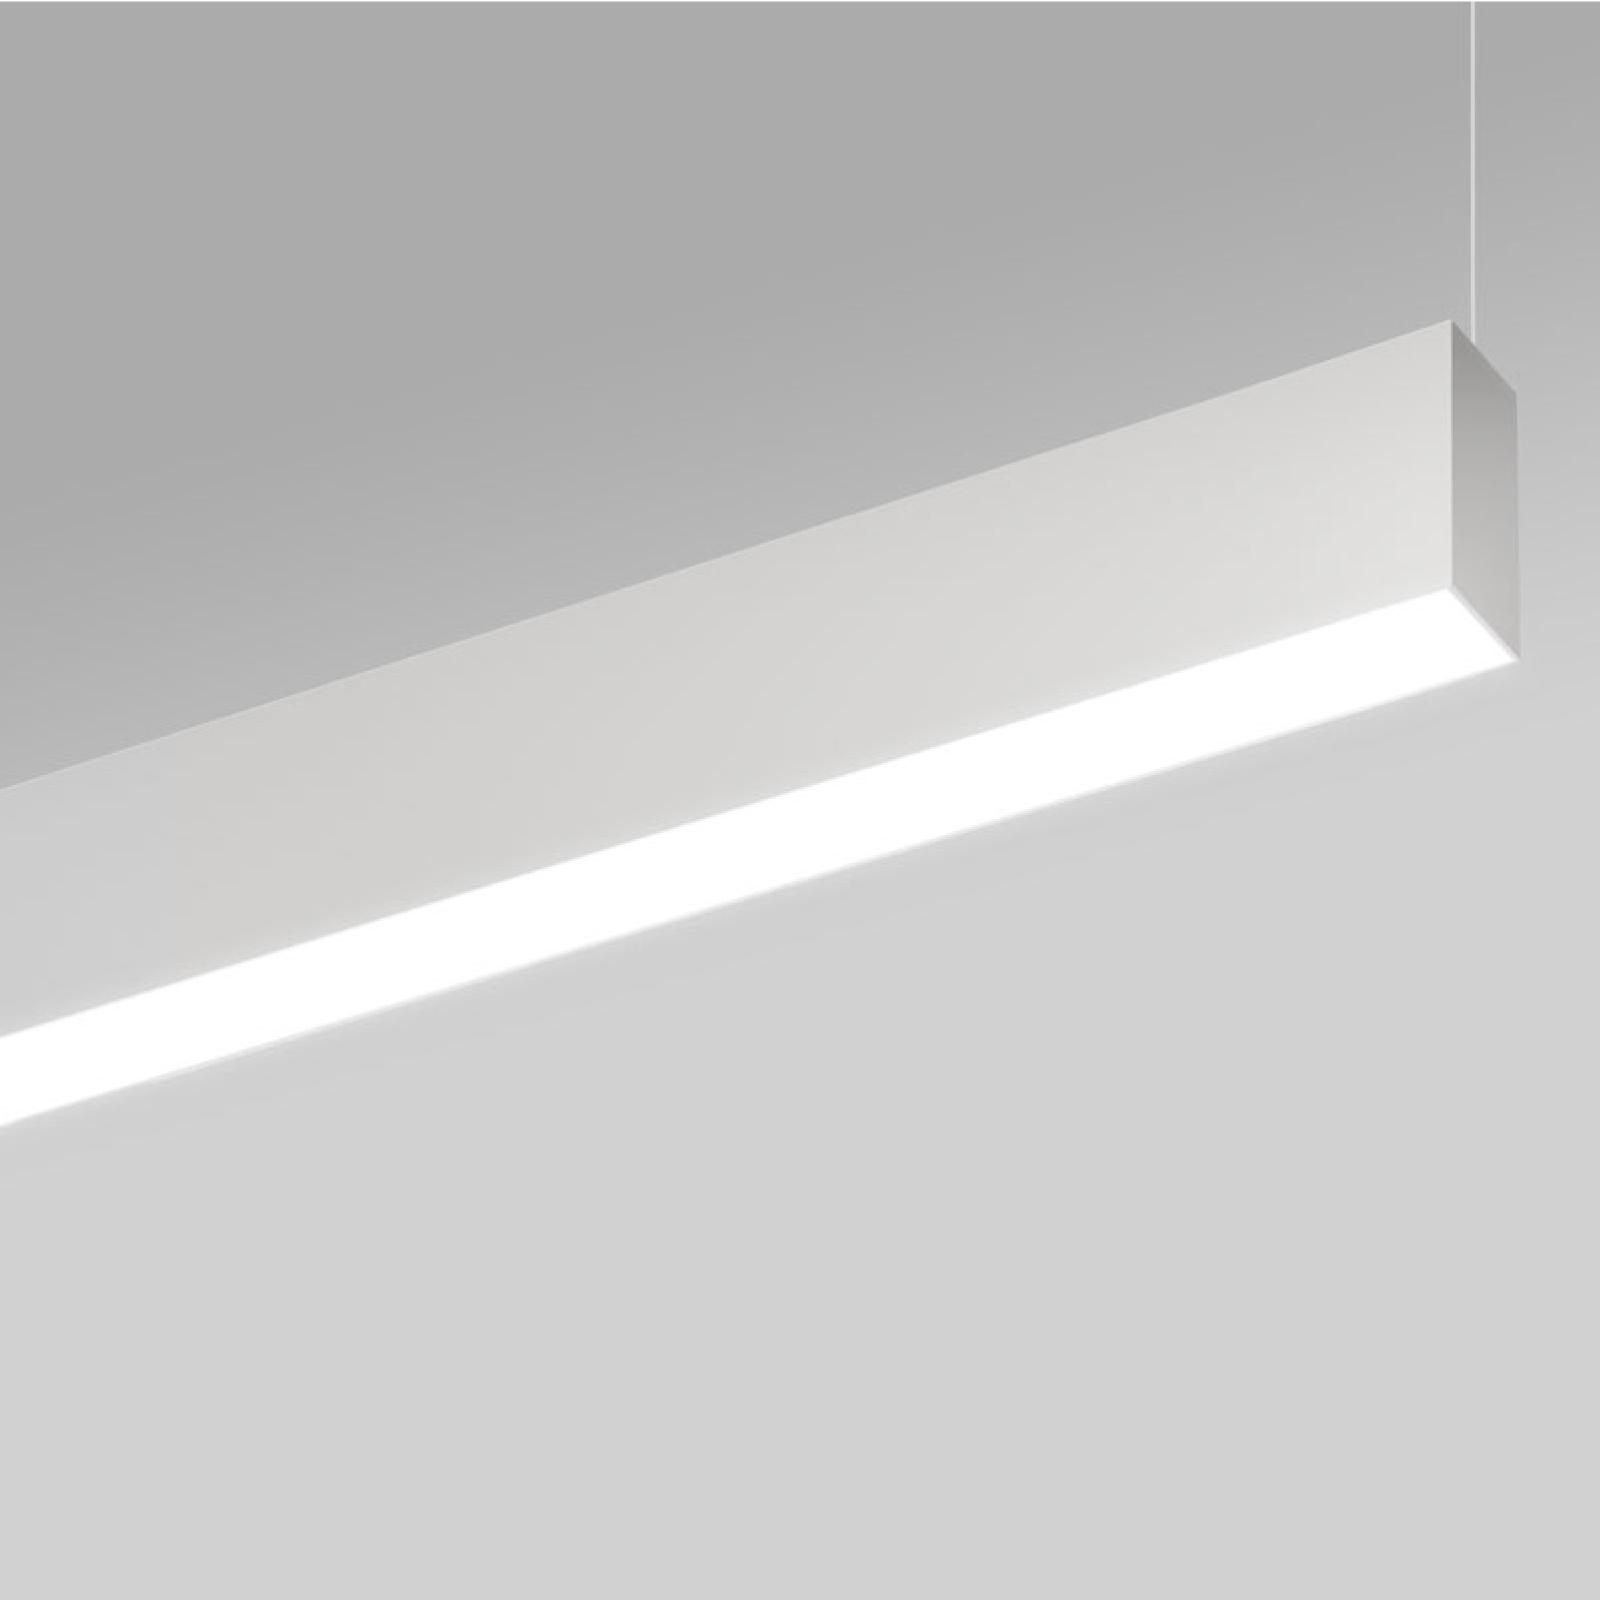 Gallery Rollip Linear Light System Linealightgroup 1200X1200 8 (1)